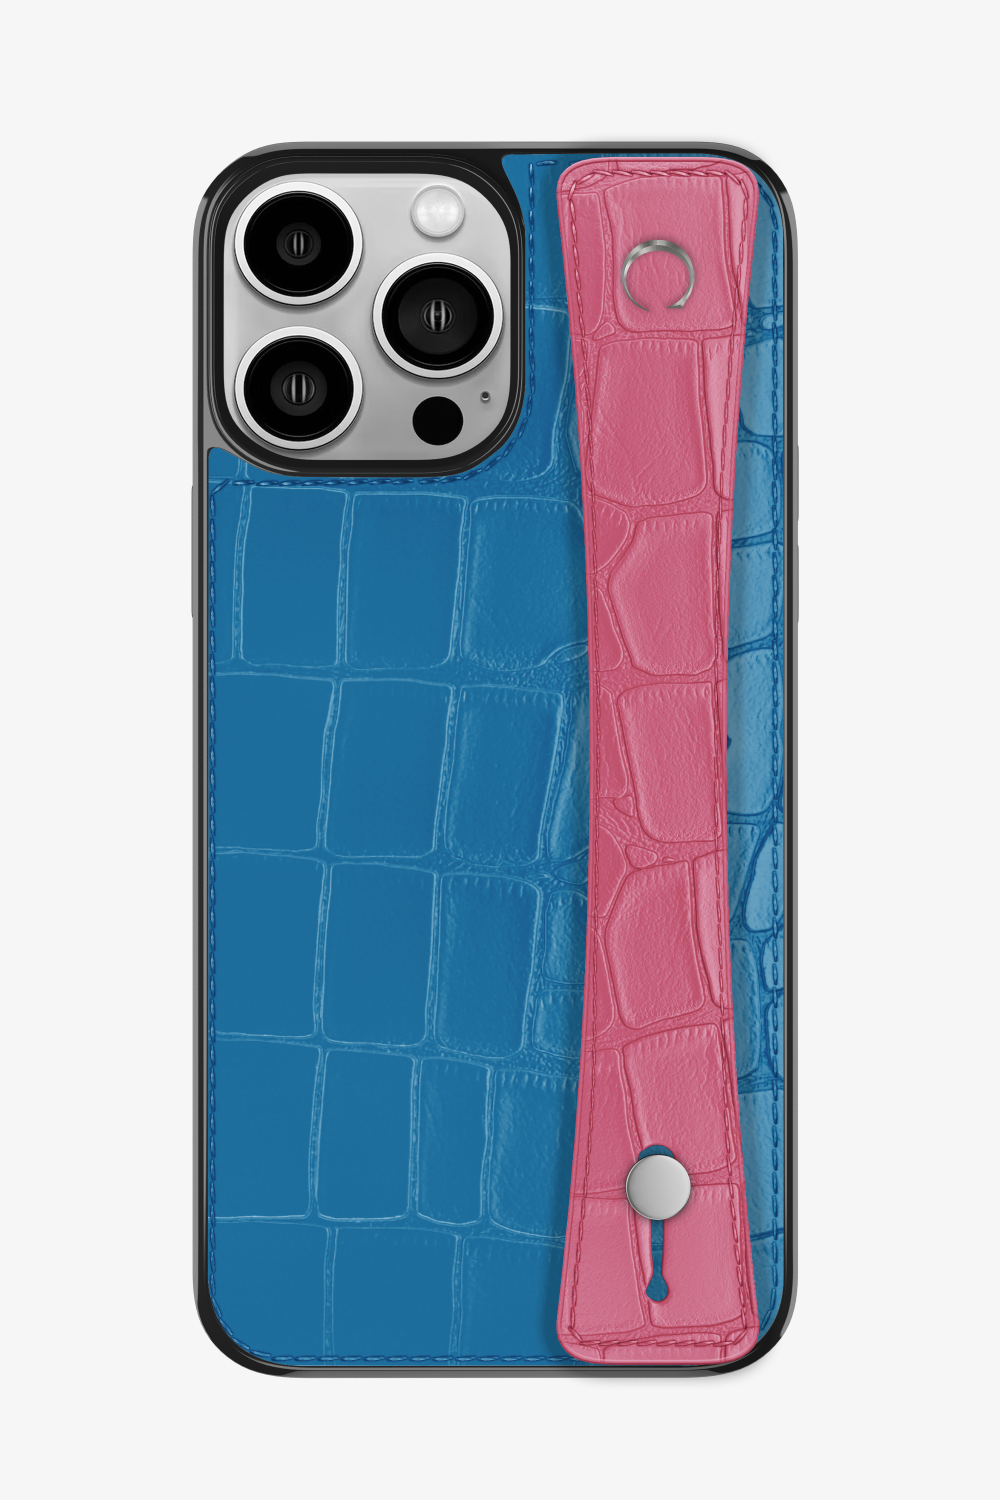 Alligator Sports Strap Case for iPhone 15 Pro Max - Blue Lagoon / Pink - zollofrance